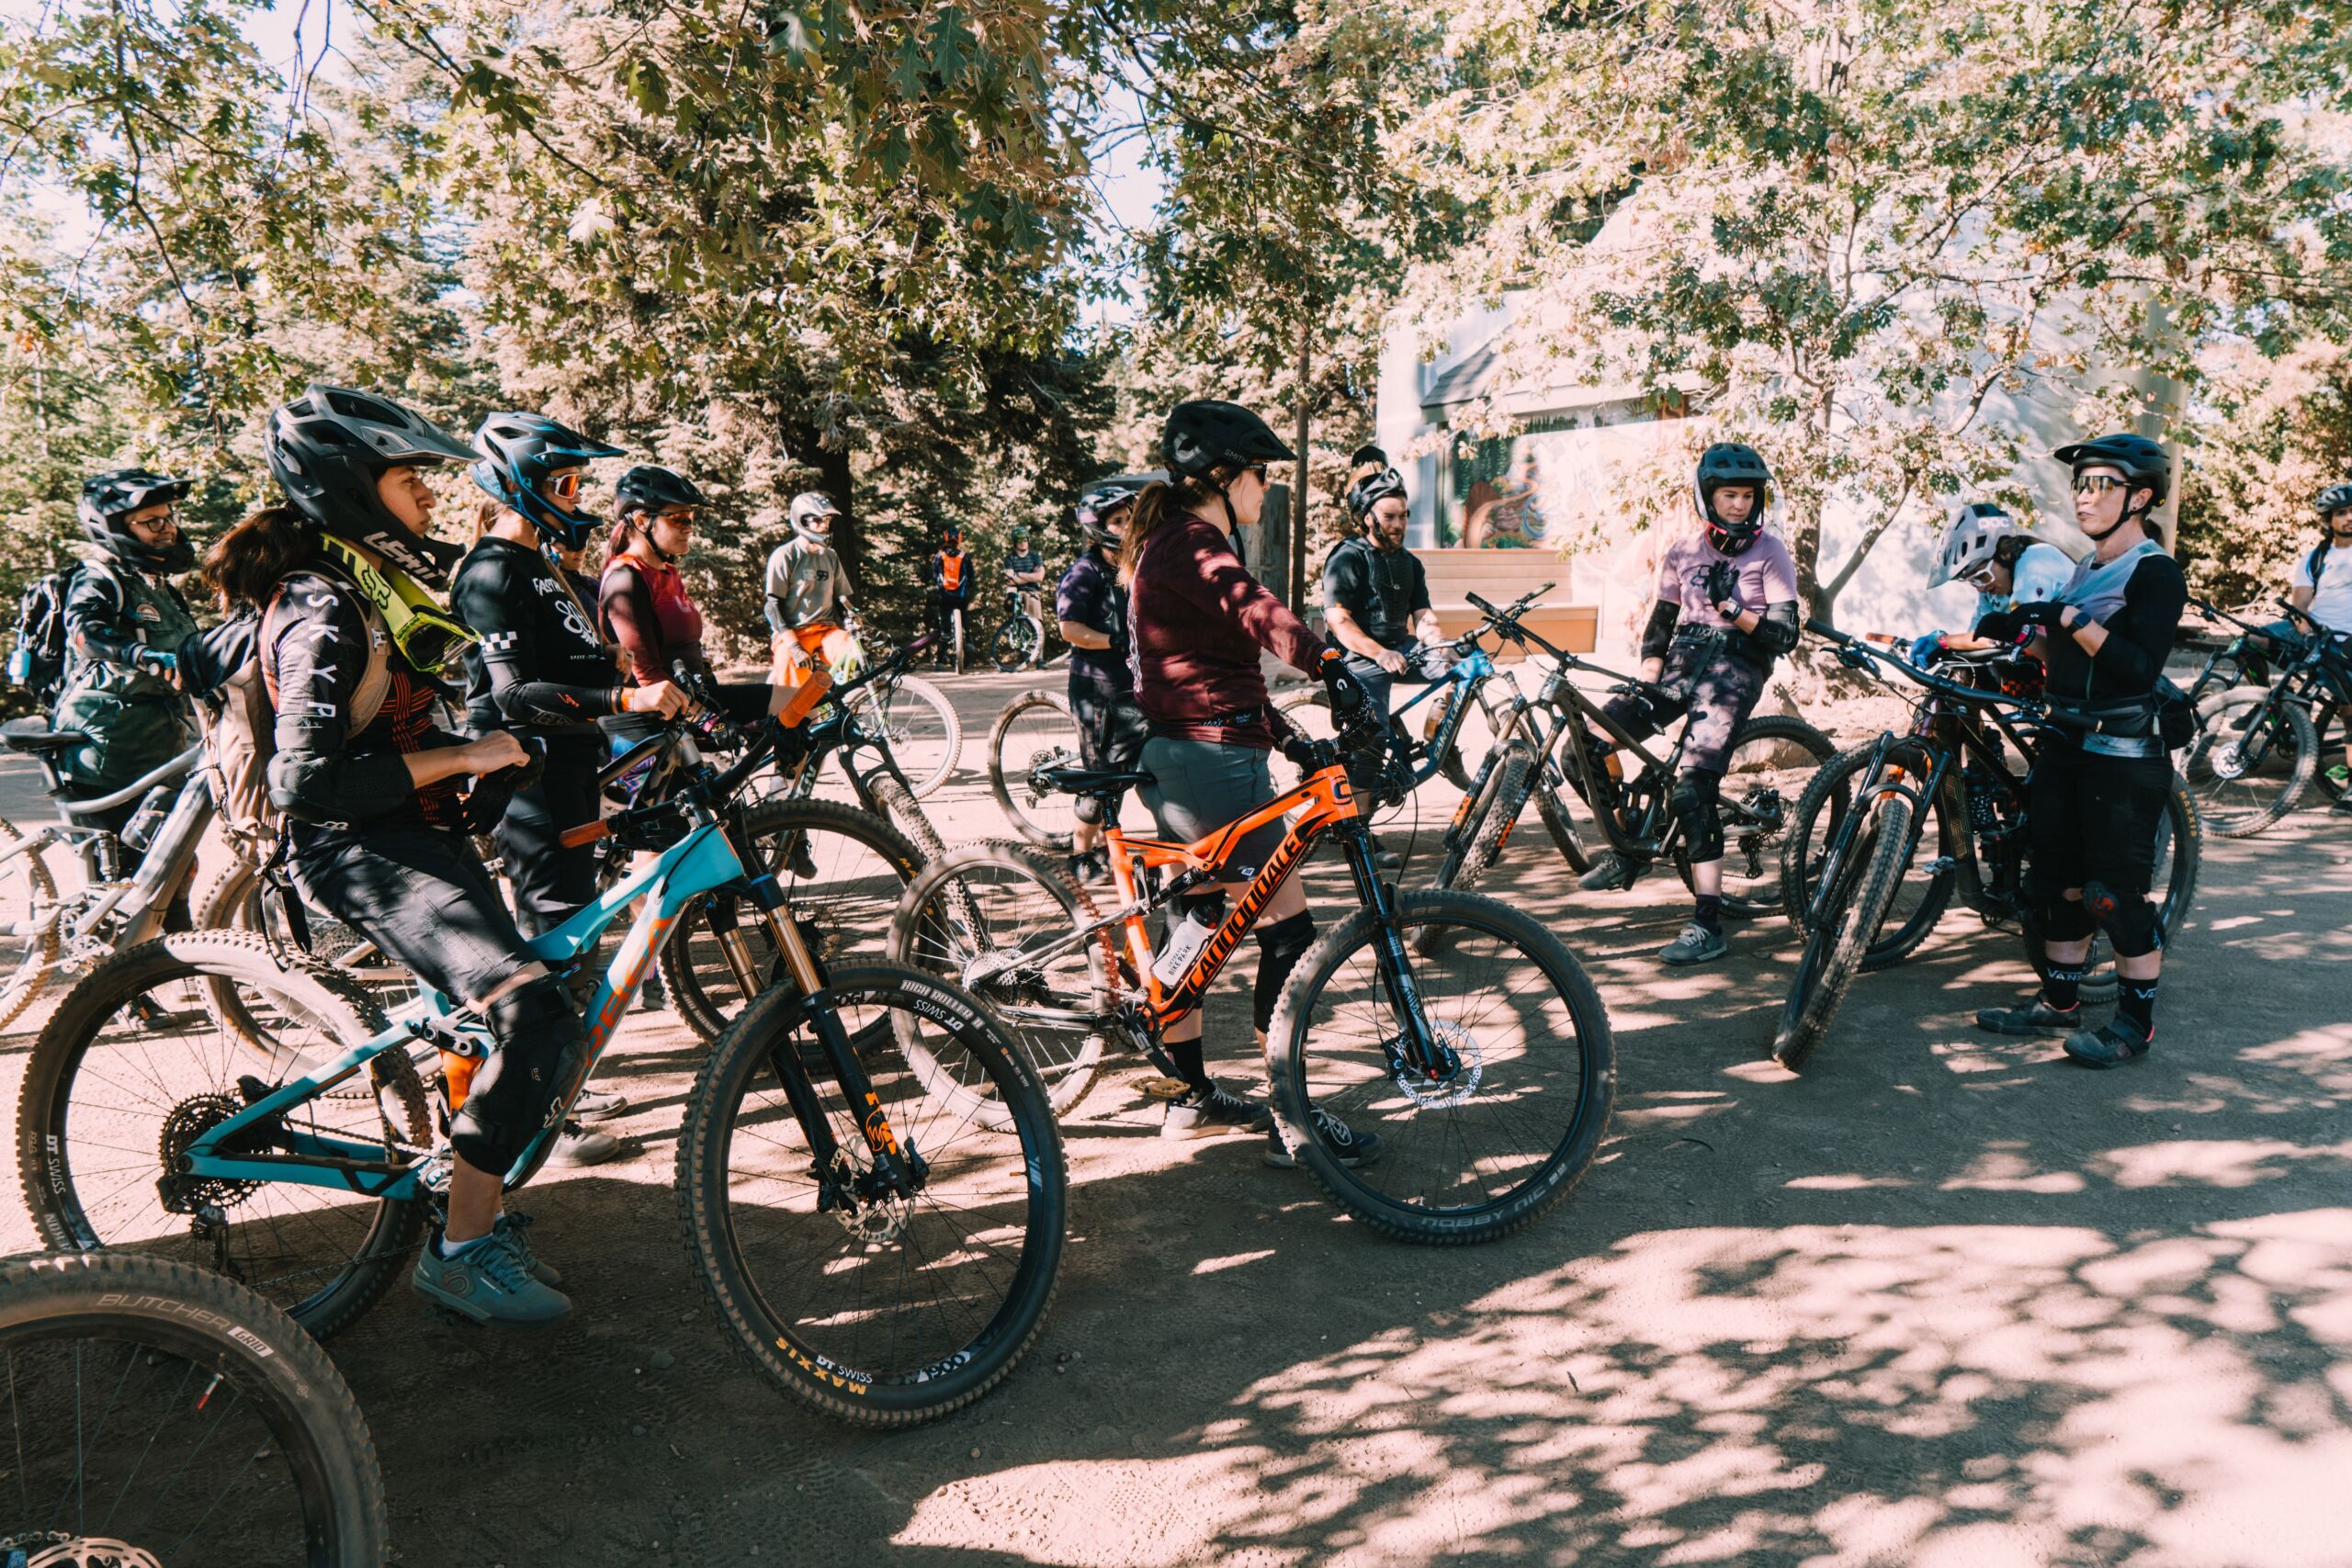 Join the Happy Hour group ride with LIV Cycling during International Women's MTB Day!